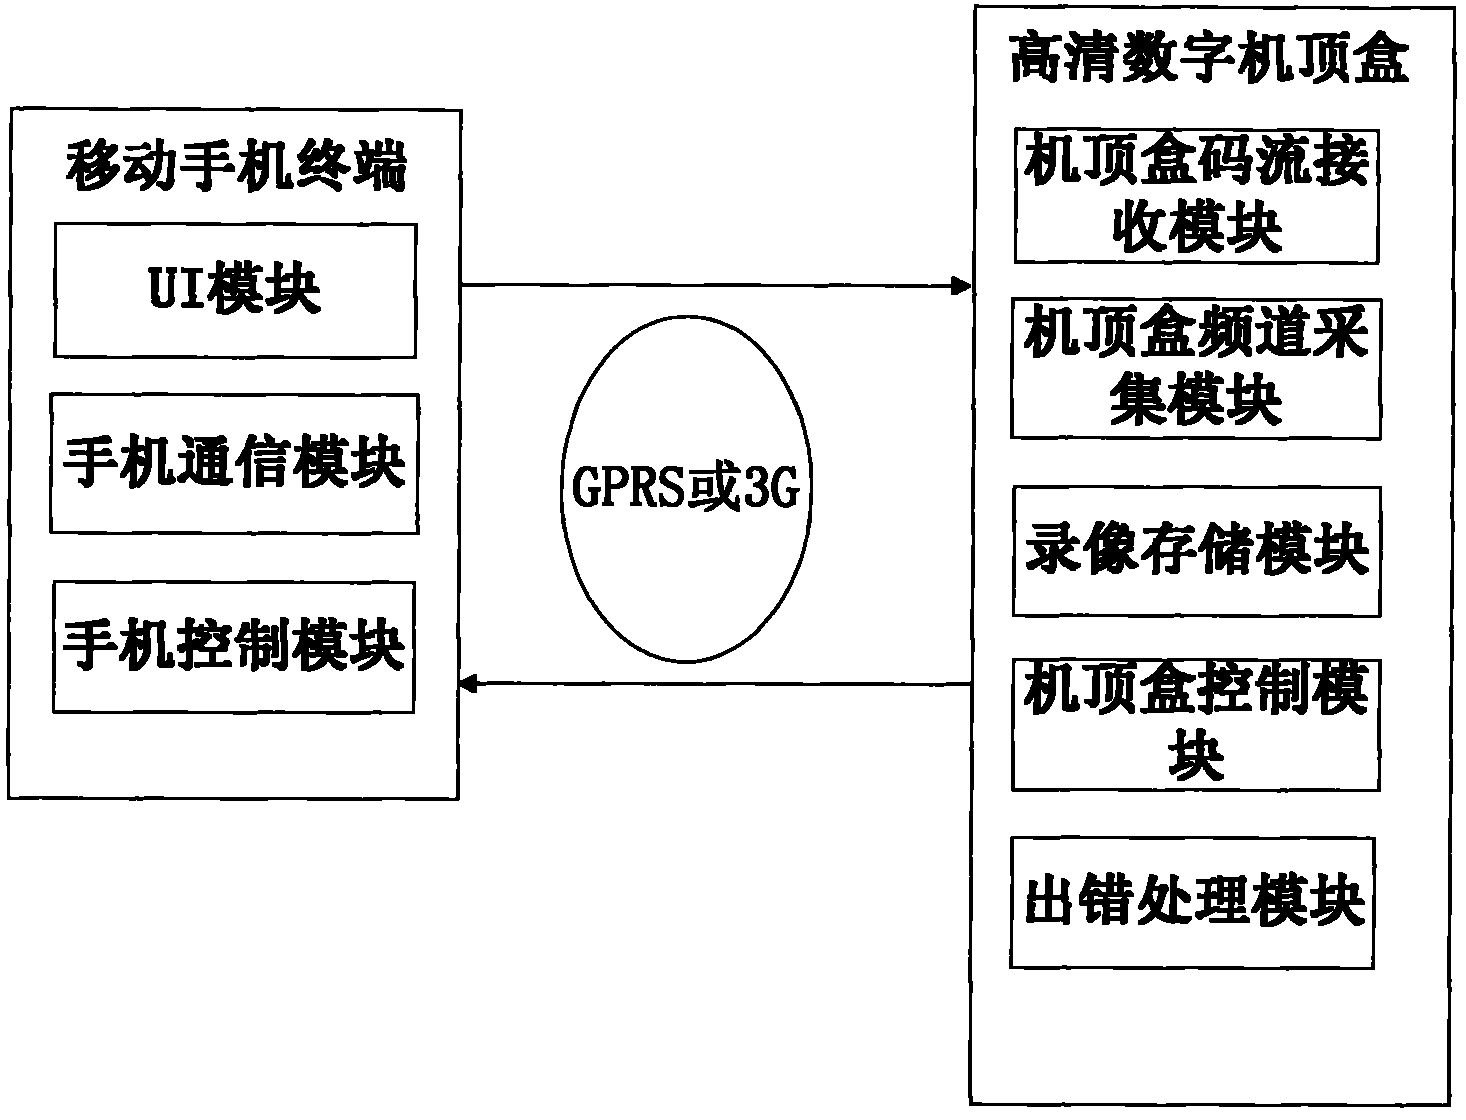 High-definition video system and method supporting remote mobile reservation based on set-top box